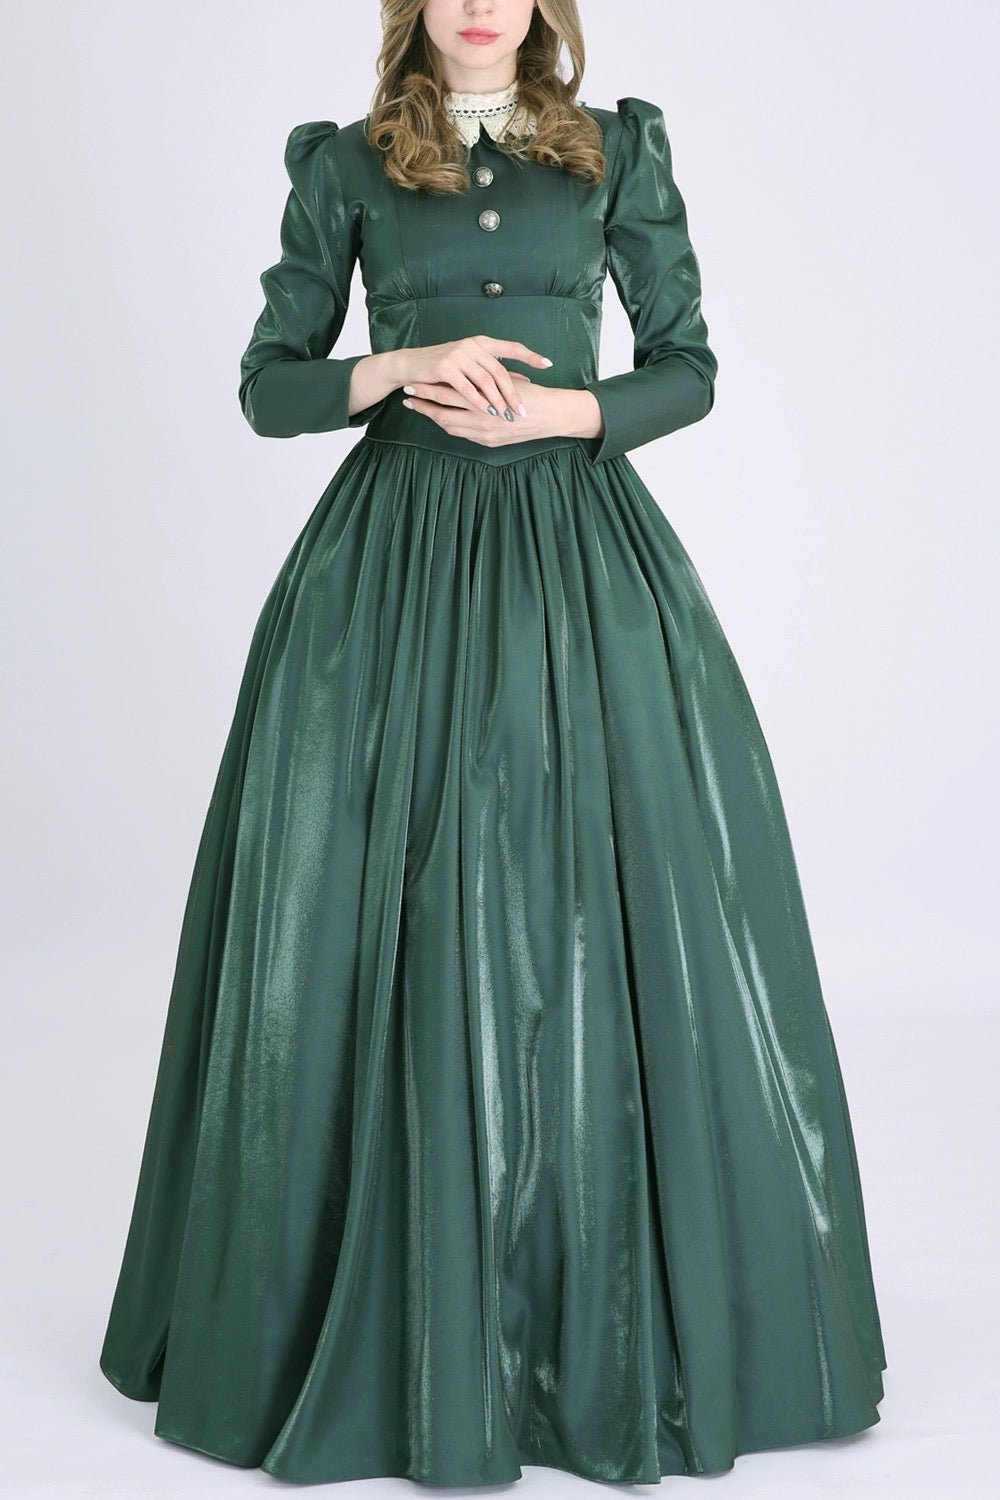 Gothic Green Victorian Ball Gown - Midieval Style Dress with Lace and Button Accents Plus Size - WonderlandByLilian